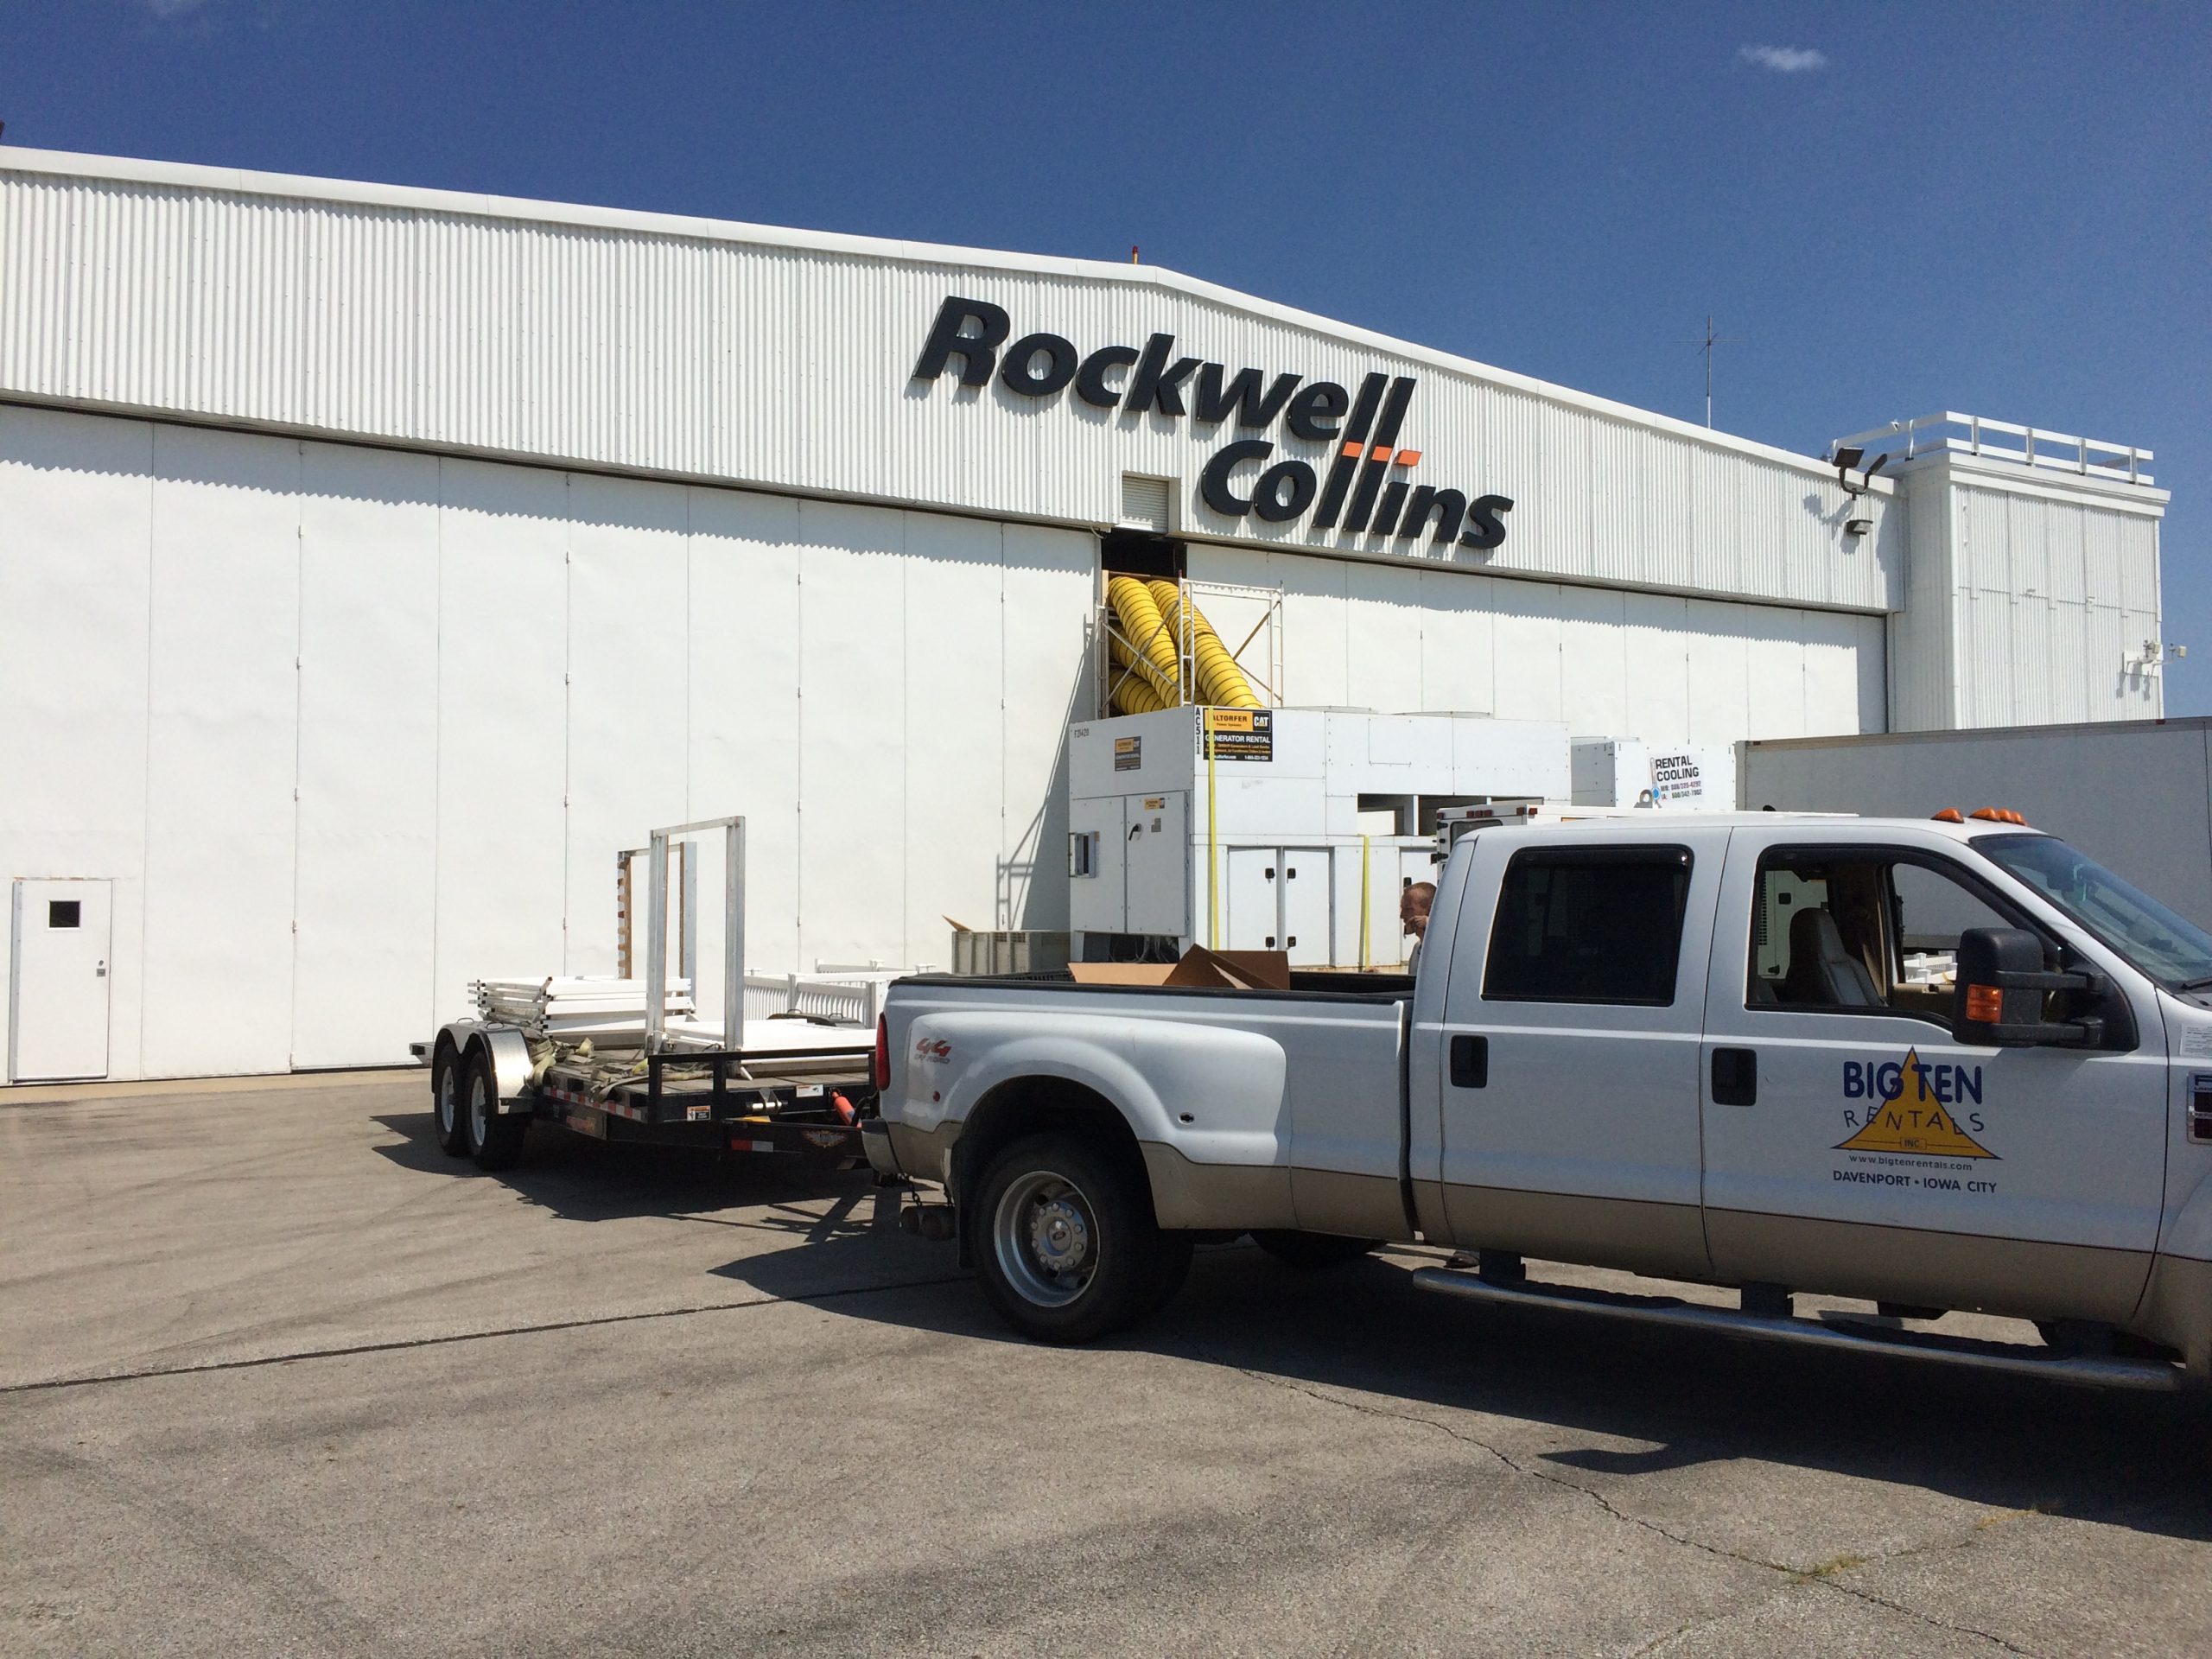 HVAC Air Conditioning of the Rockwell Collins airplane hangar at the Eastern Iowa Airport and Big Ten Rentals Truck